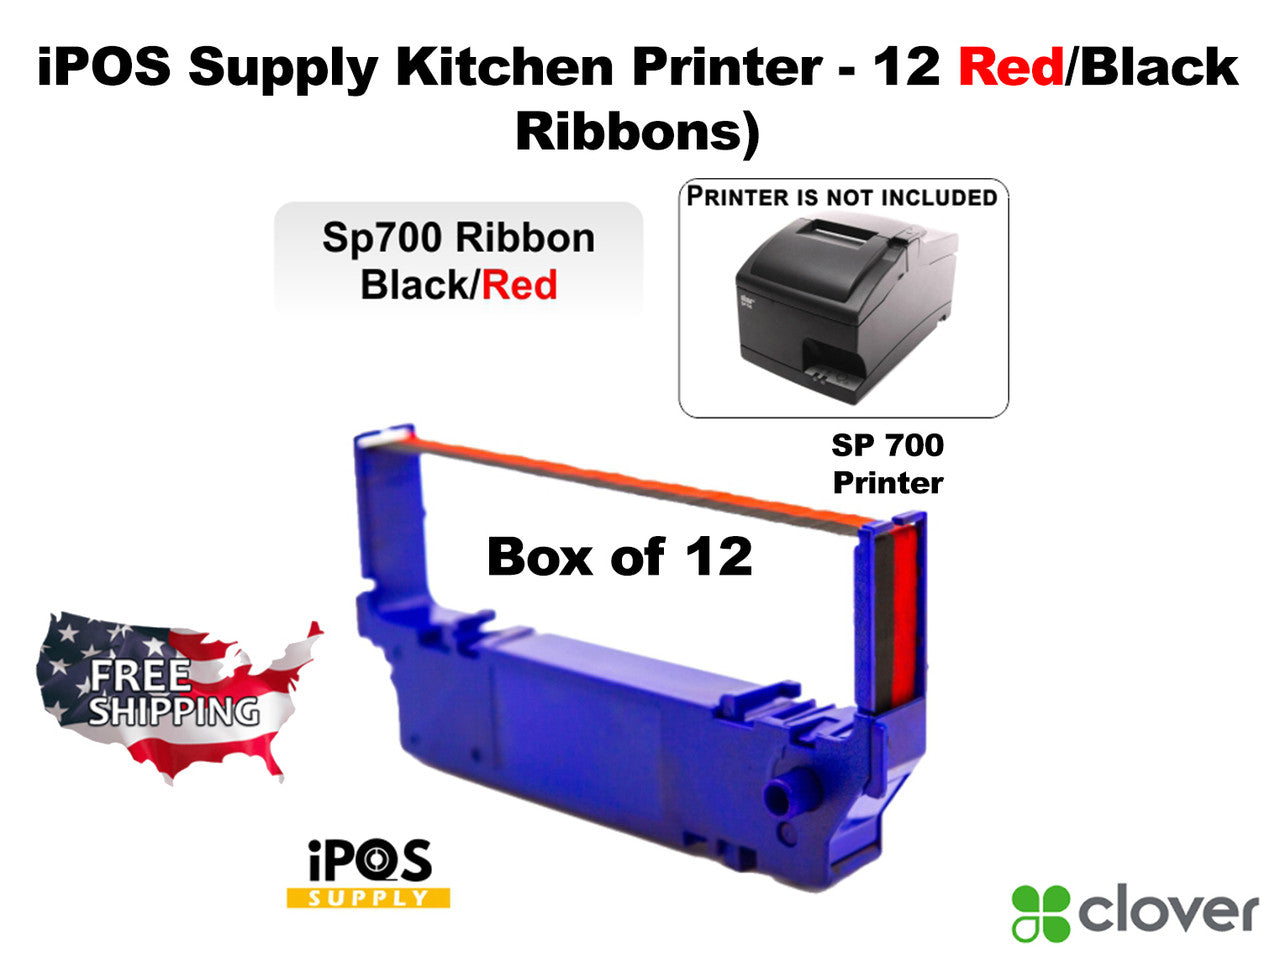 Clover POS Ink Kitchen Printer - 12 Red/Black Ribbons Box Of 12 Ink High Quality